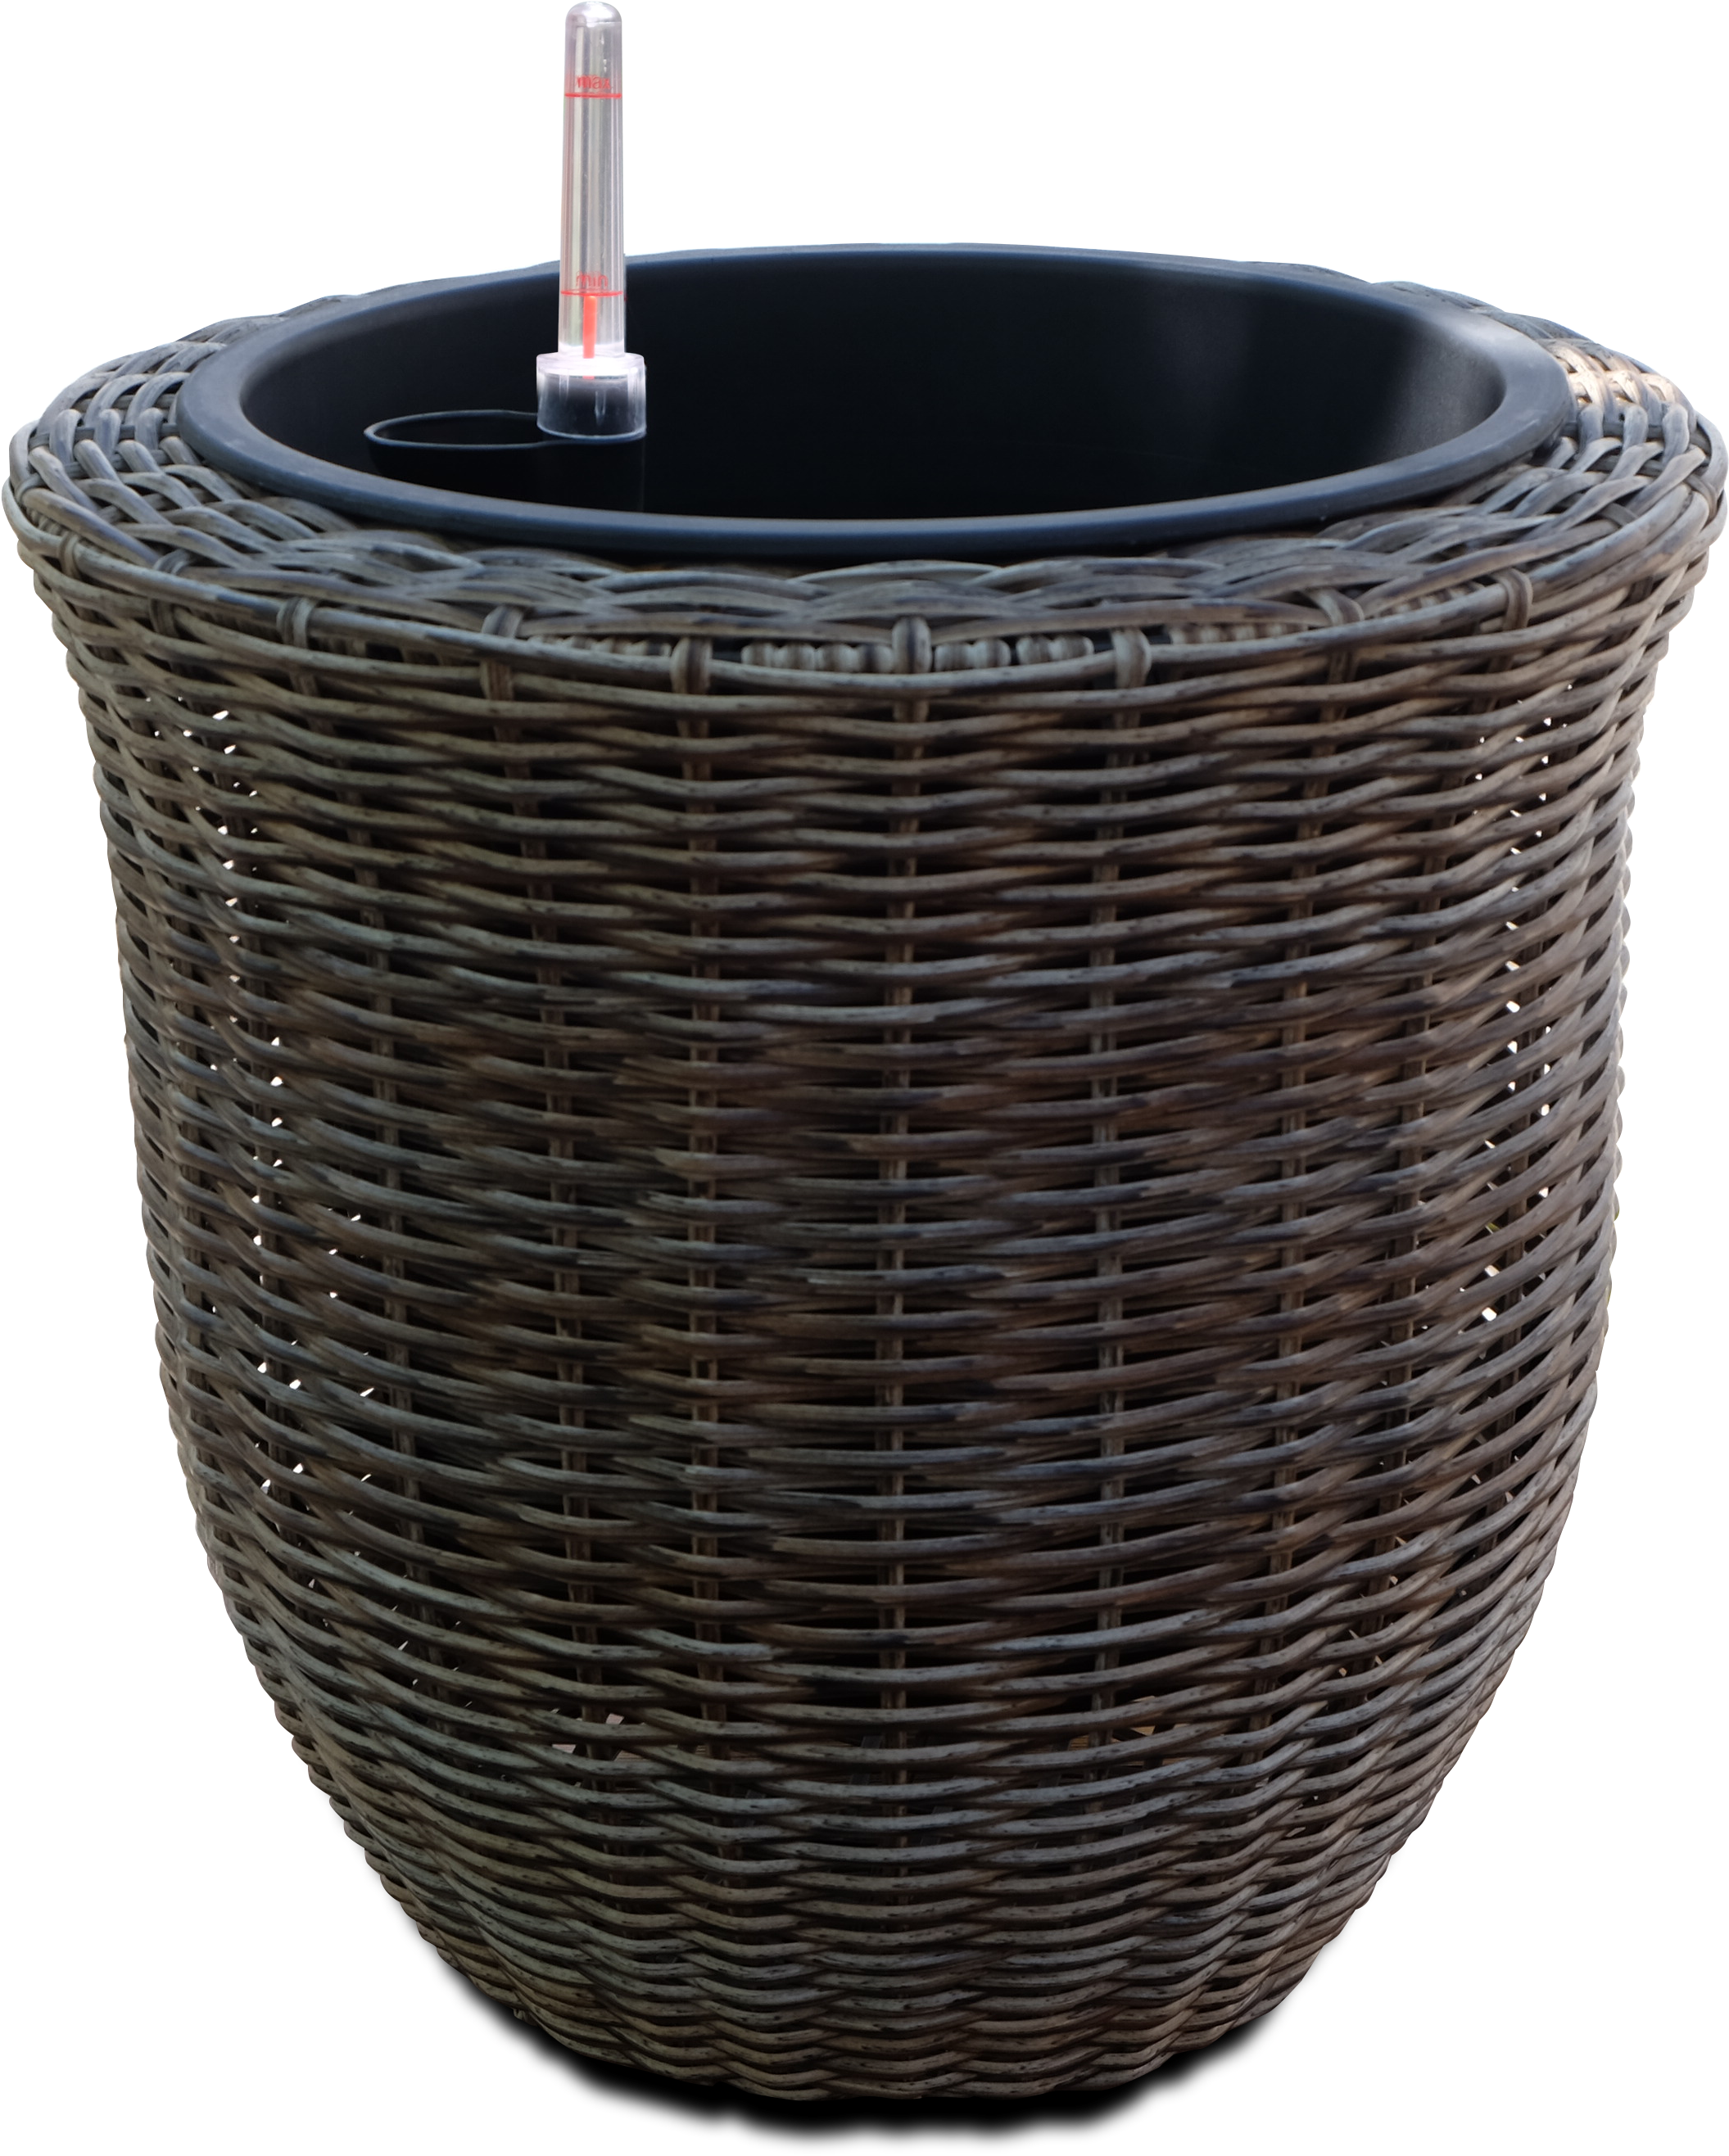 A Wicker Trash Can With A Straw